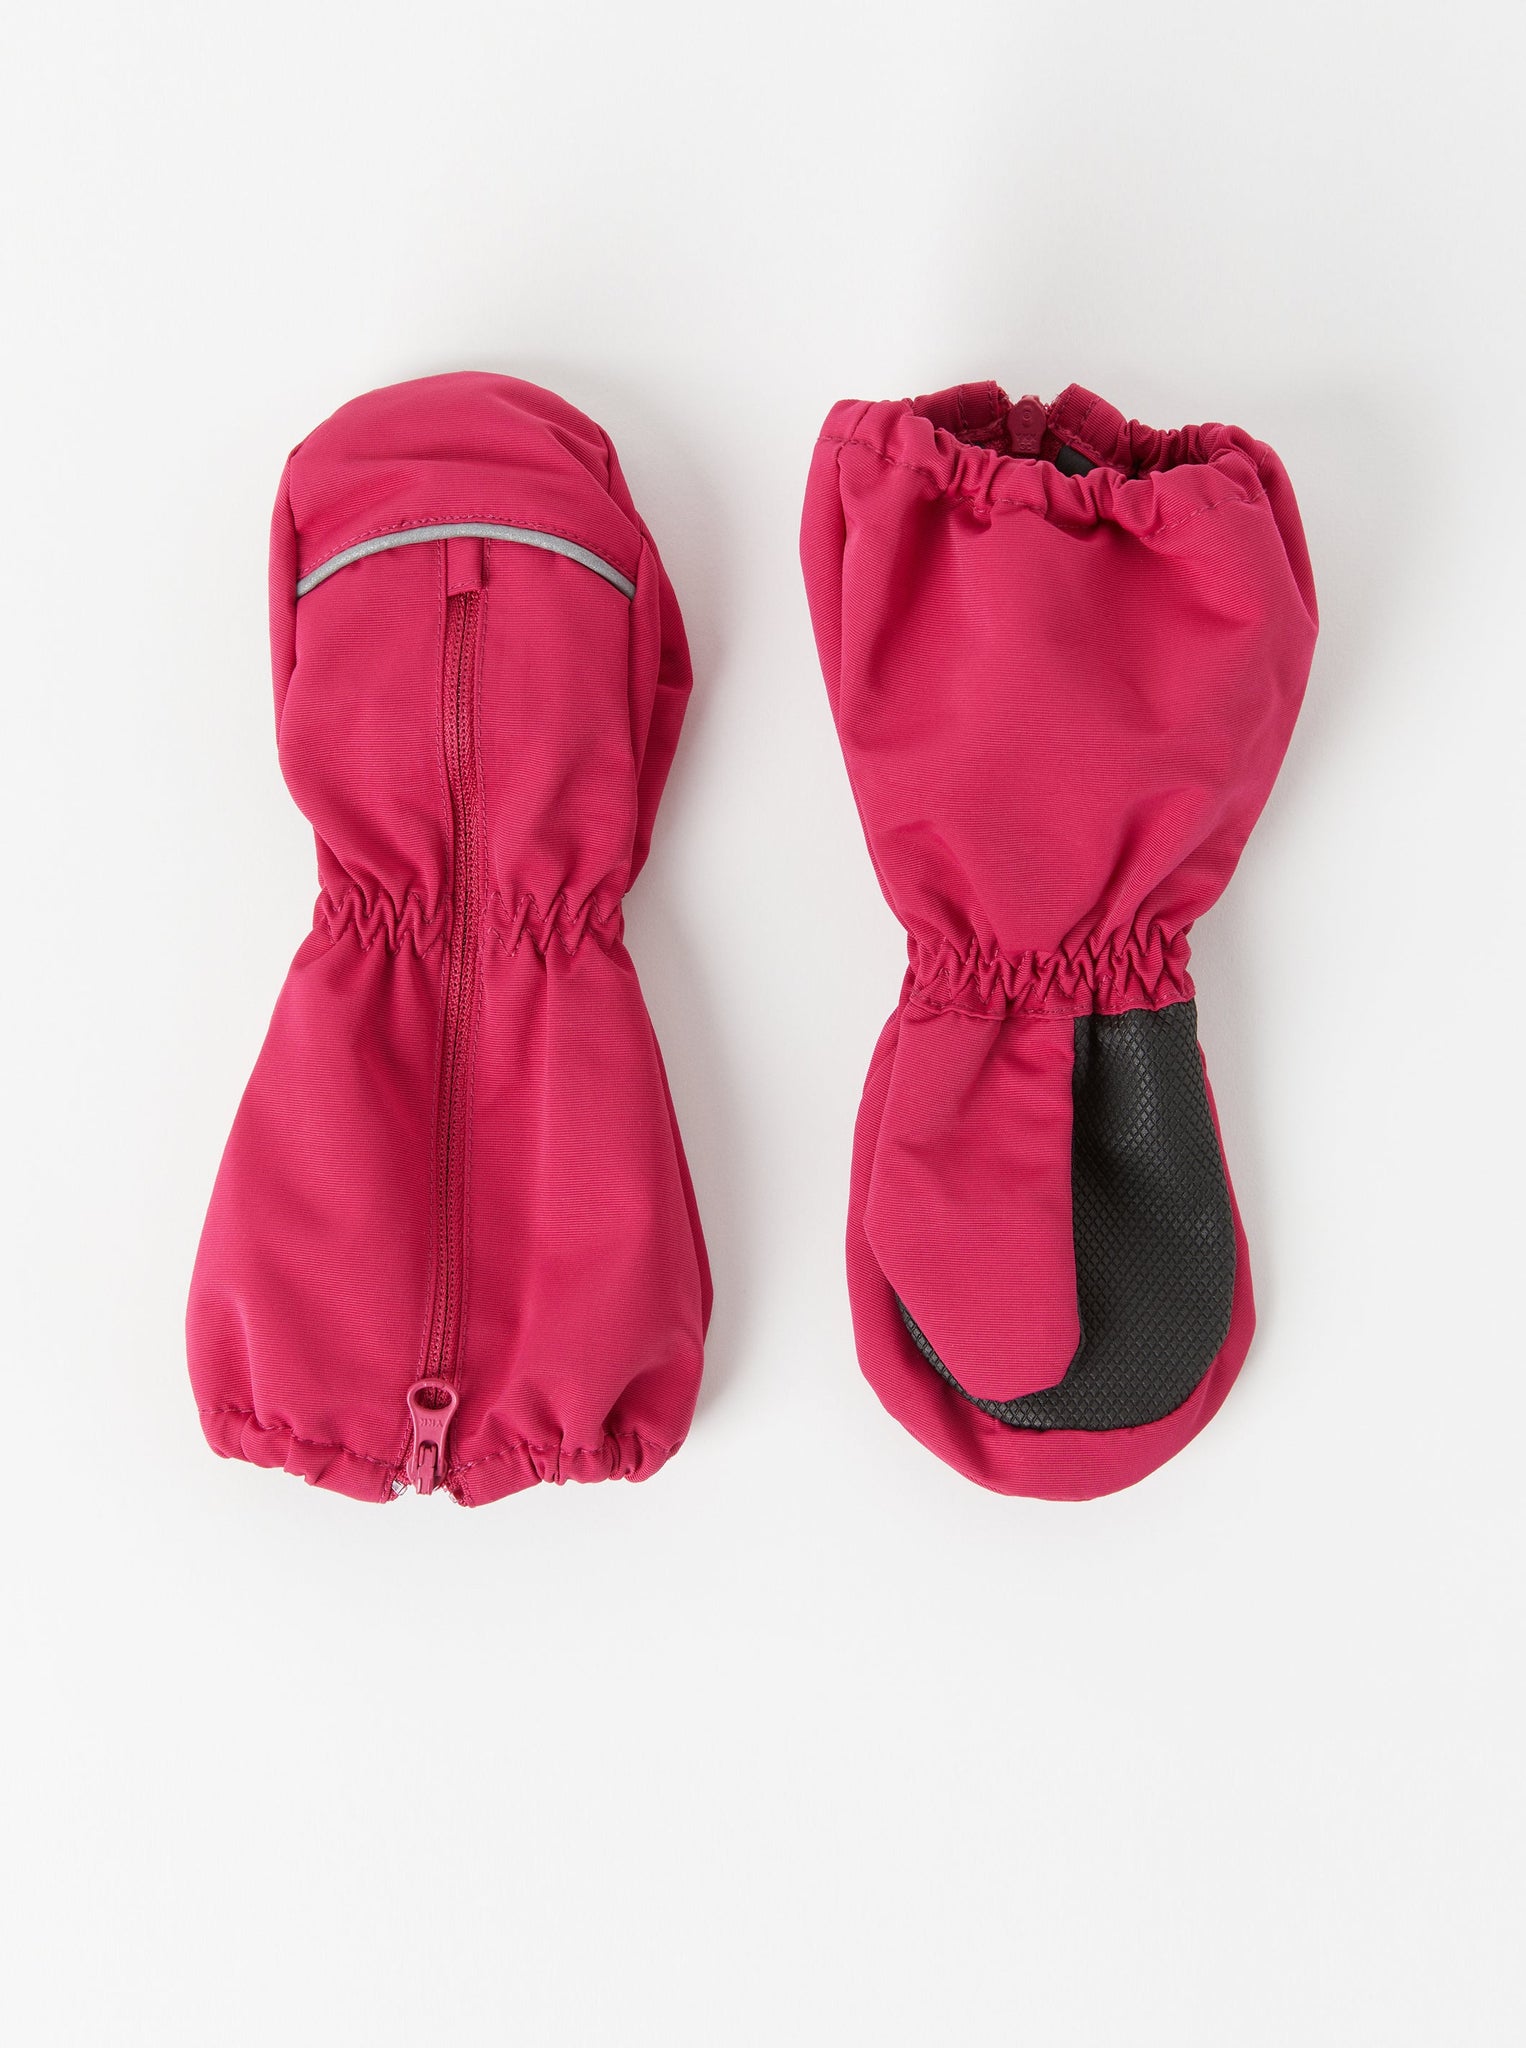 Red Kids Waterproof Mittens from the Polarn O. Pyret kidswear collection. The best ethical kids outerwear.